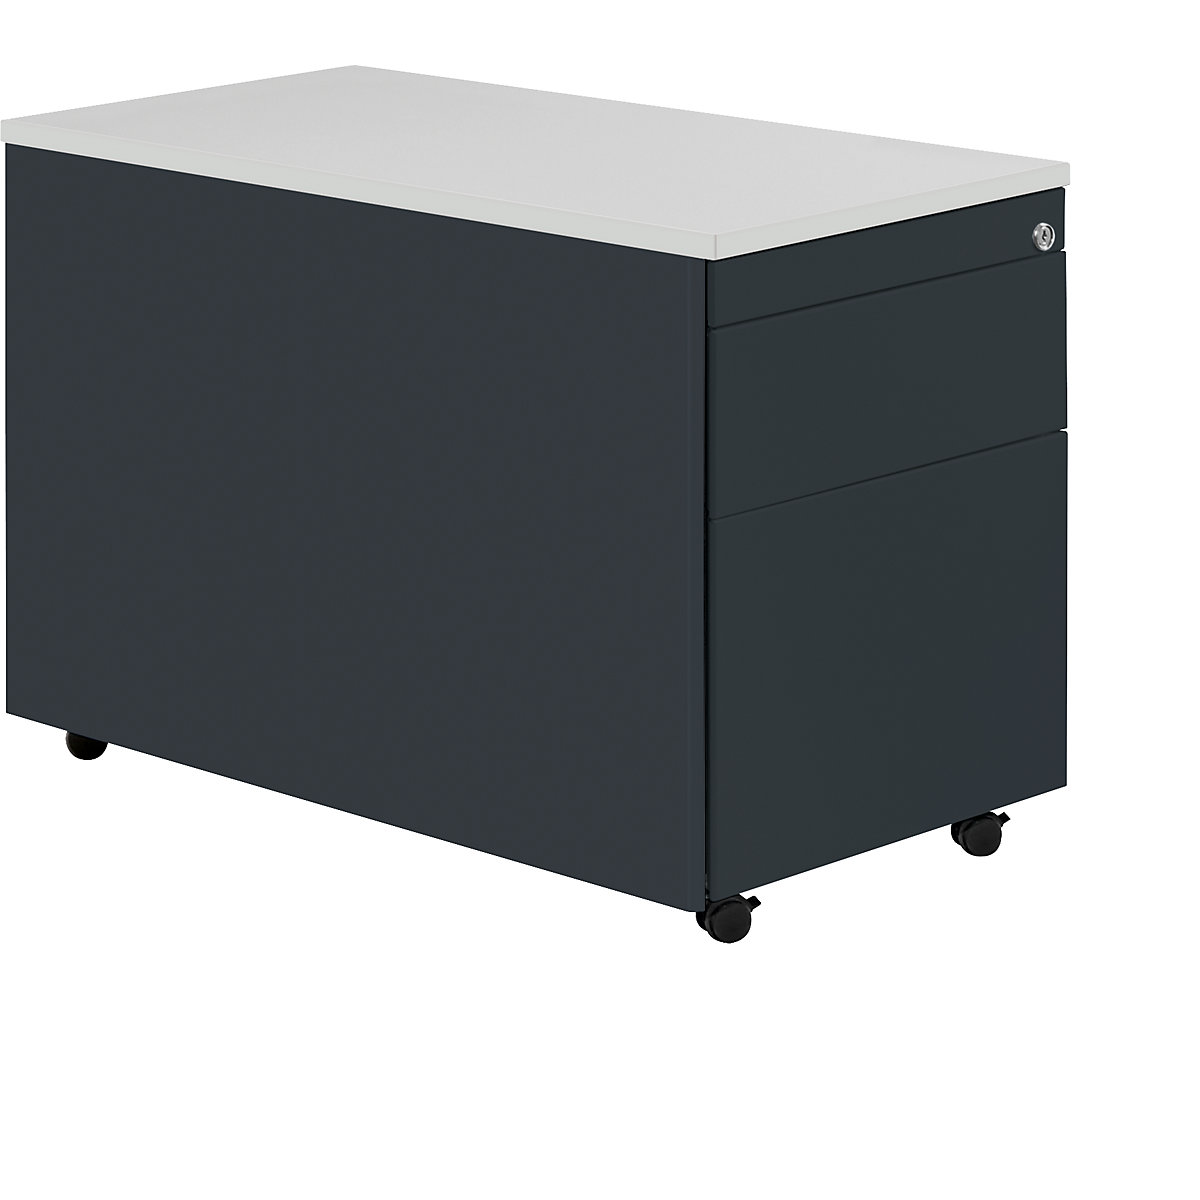 Drawer pedestal with castors – mauser, HxD 579 x 800 mm, plastic panel, 1 drawer, 1 suspension file drawer, charcoal / charcoal / light grey-7